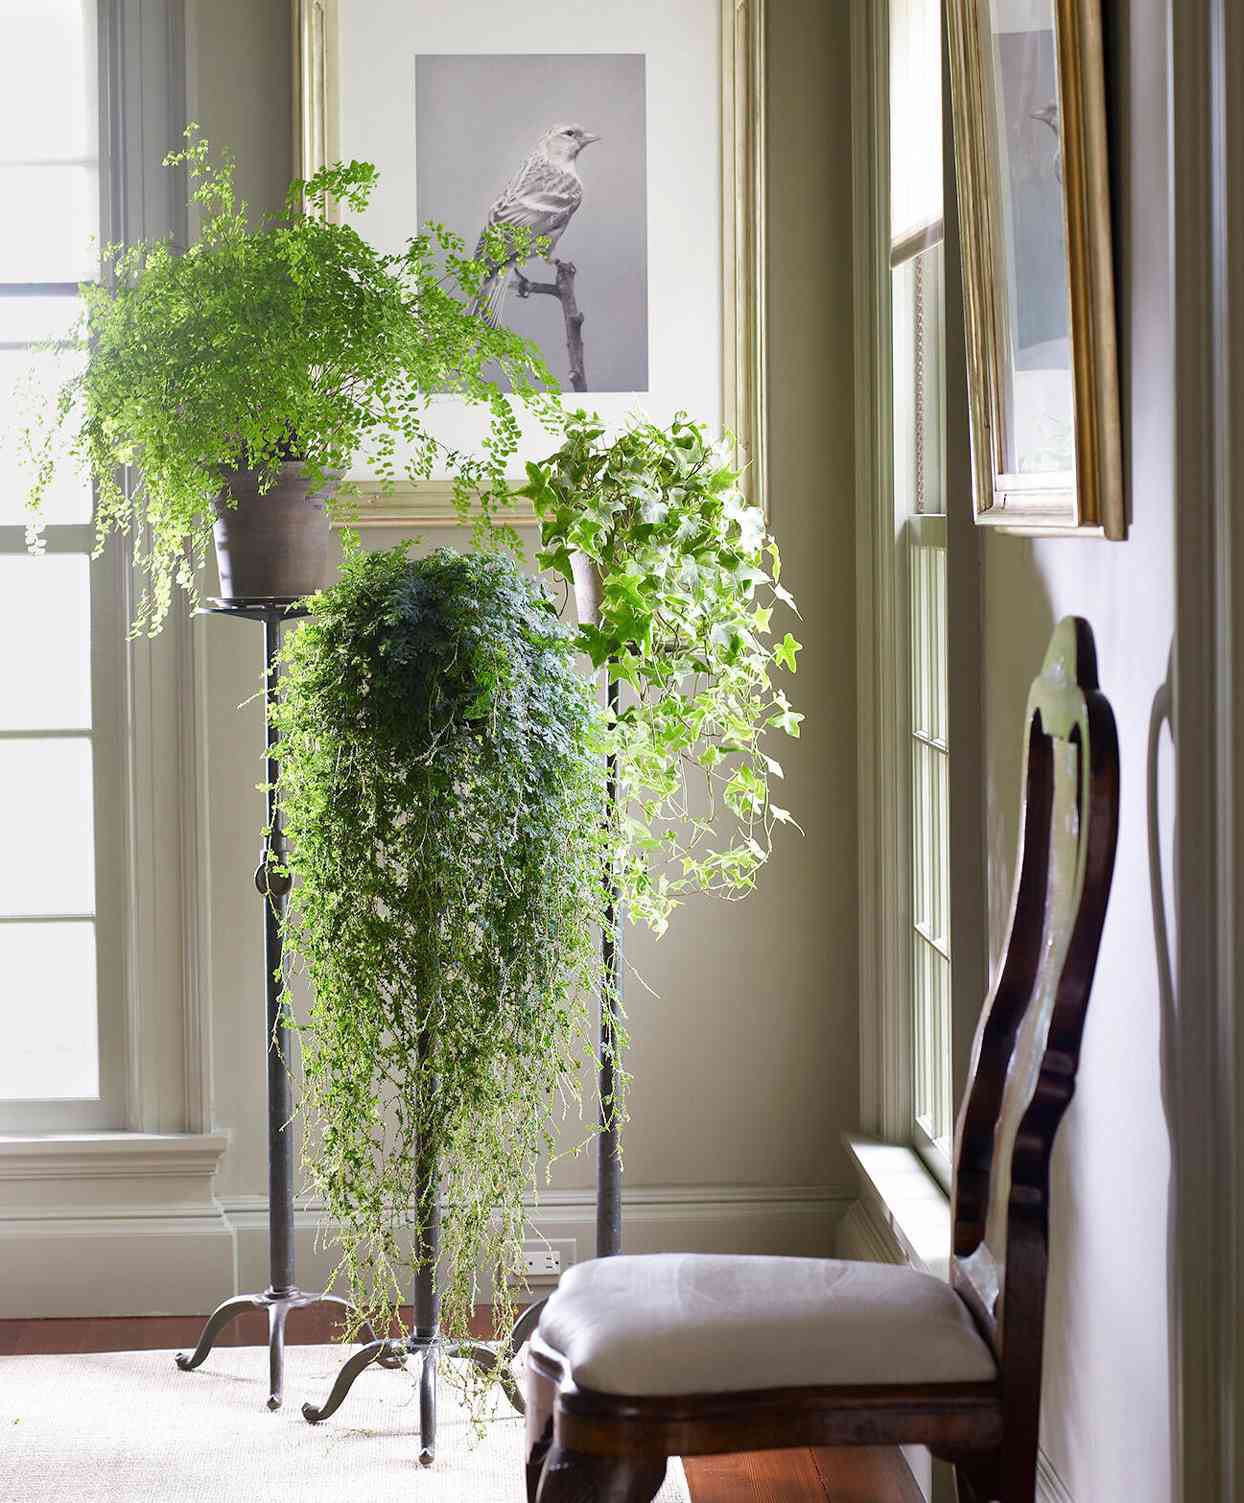 How to Get Rid of the Pesky Gnats Buzzing Around Your Houseplants